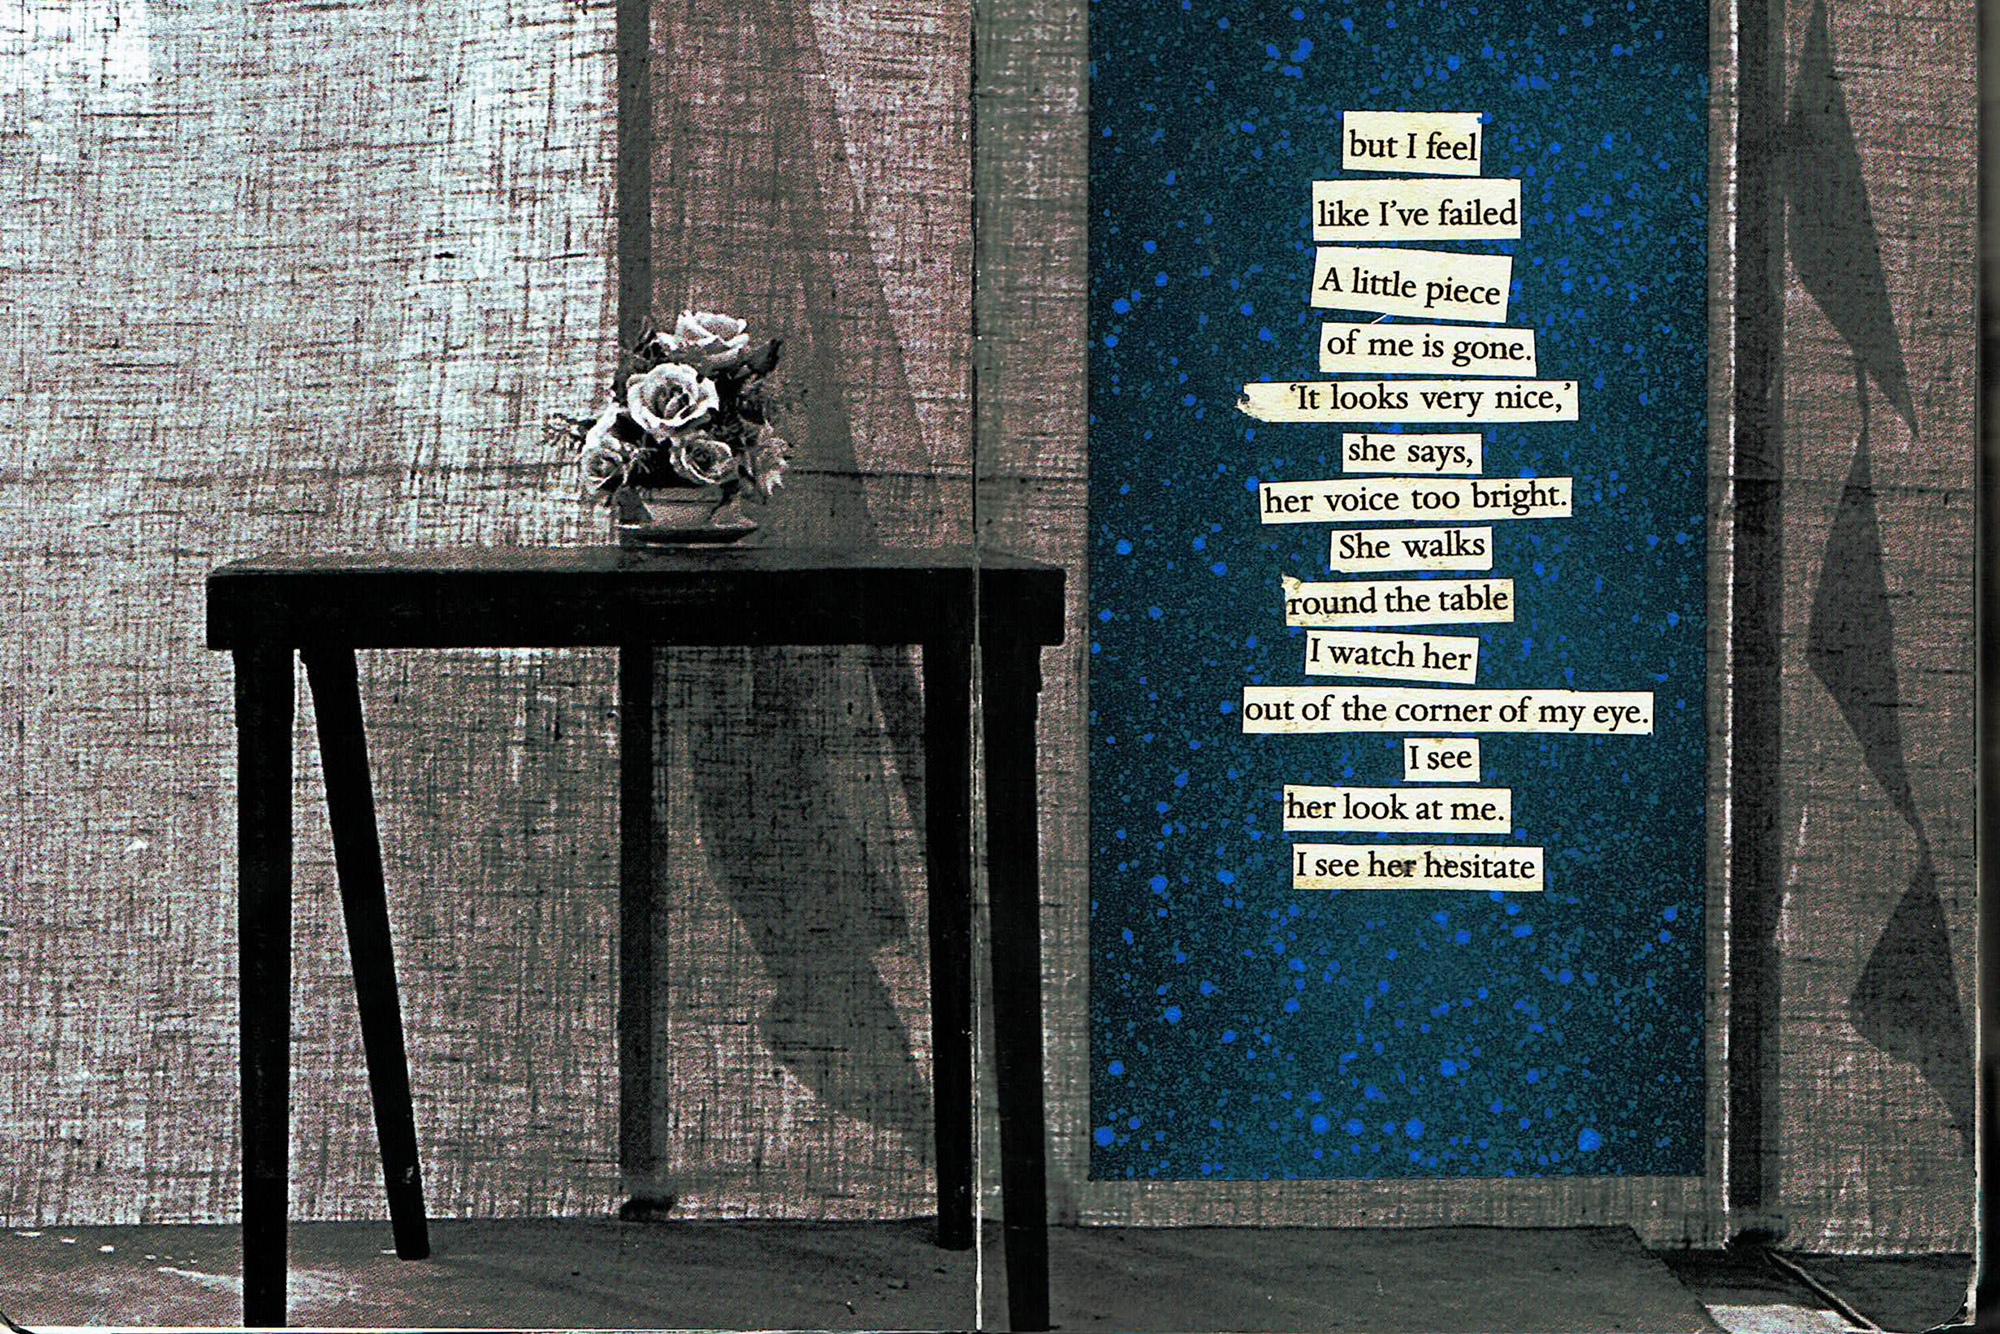 A short poem written by randomly selecting cut-up text from a book.